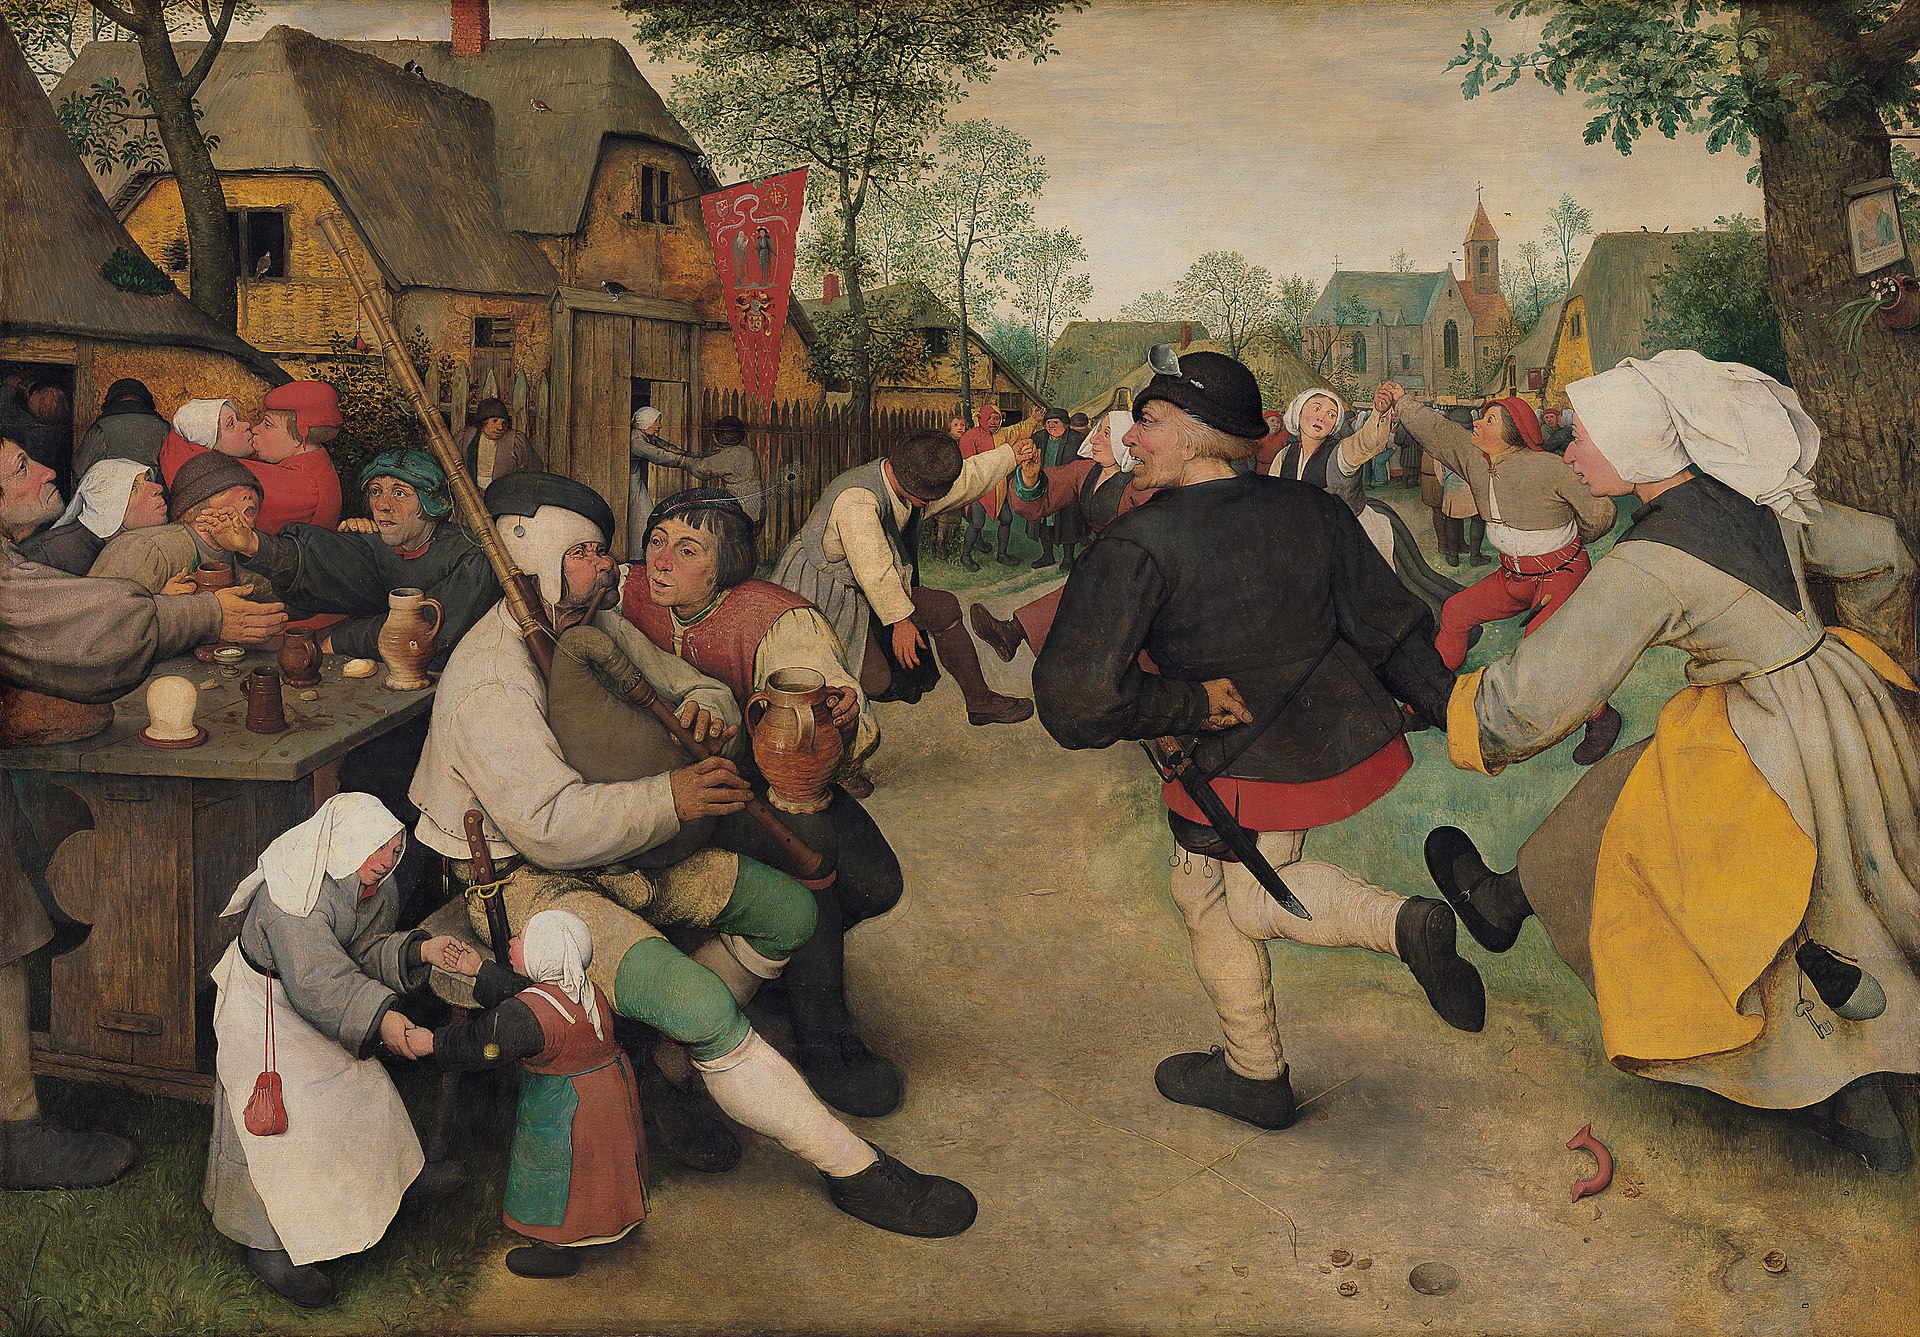 The Peasant Dance is an oil-on-panel by the Netherlandish Renaissance artist Pieter Bruegel the Elder, painted in circa 1567. It was looted by Napoleon Bonaparte and brought to Paris in 1808, being returned in 1815. Today it is held by and exhibited at the Kunsthistorisches Museum in Vienna.